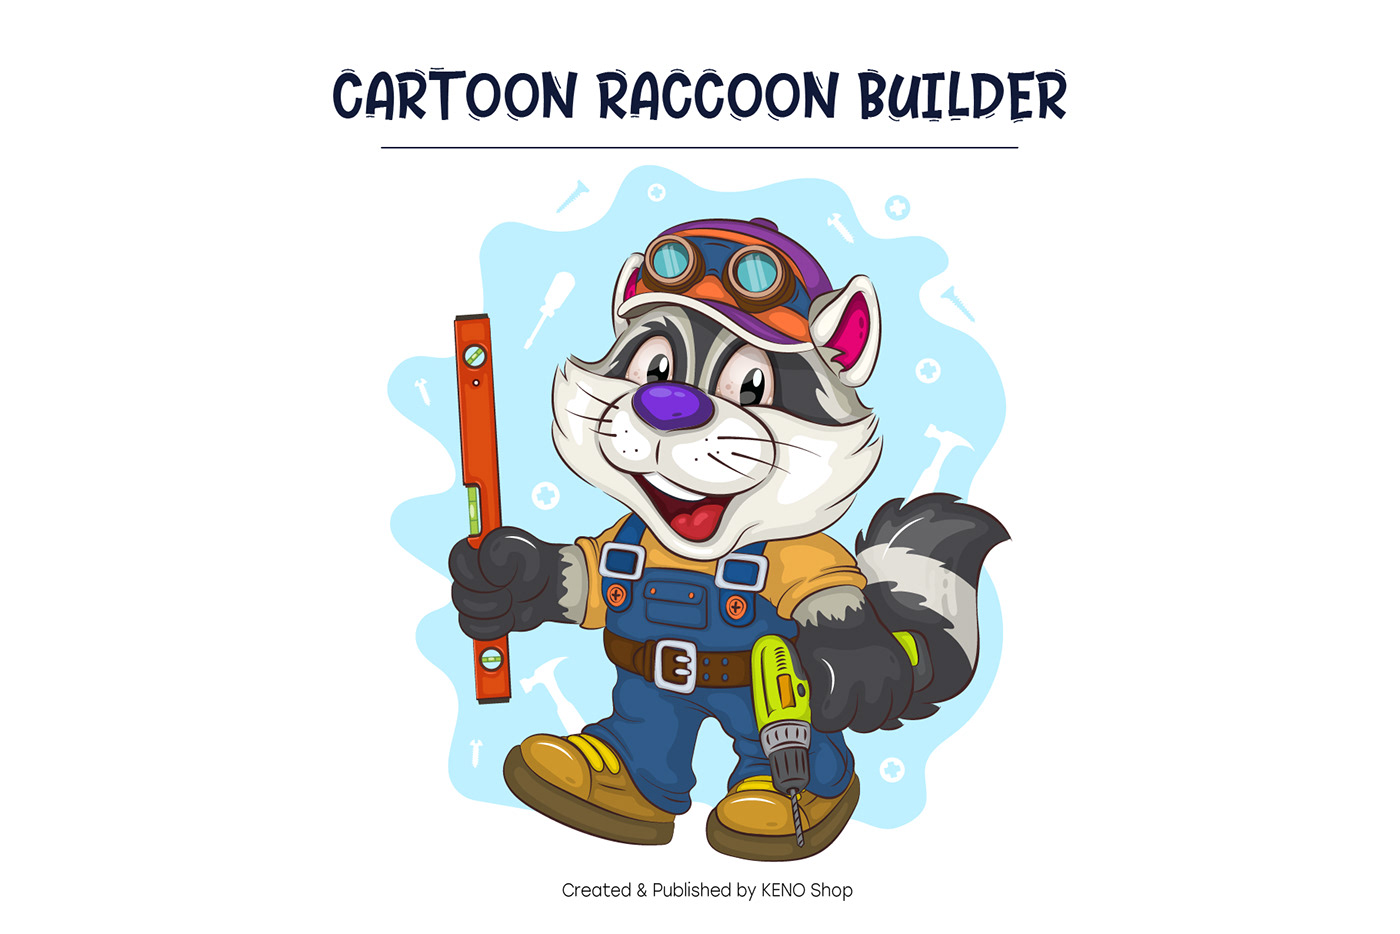 Cartoon raccoon builder. Raccoon with an electric screwdriver and a building level in his hands.